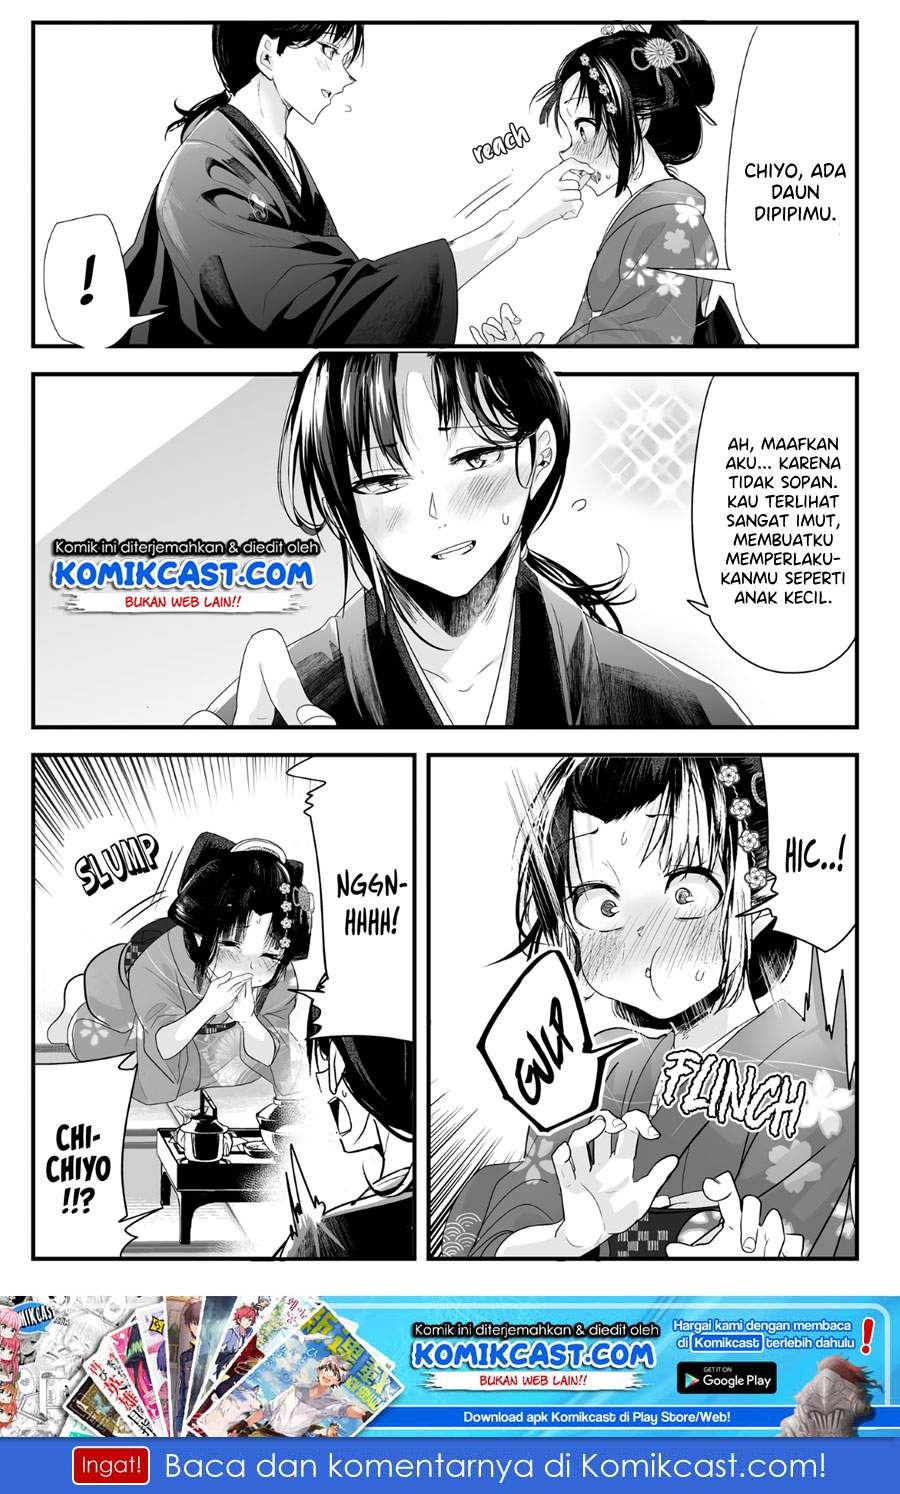 My New Wife Is Forcing Herself to Smile Chapter 28 Bahasa Indonesia